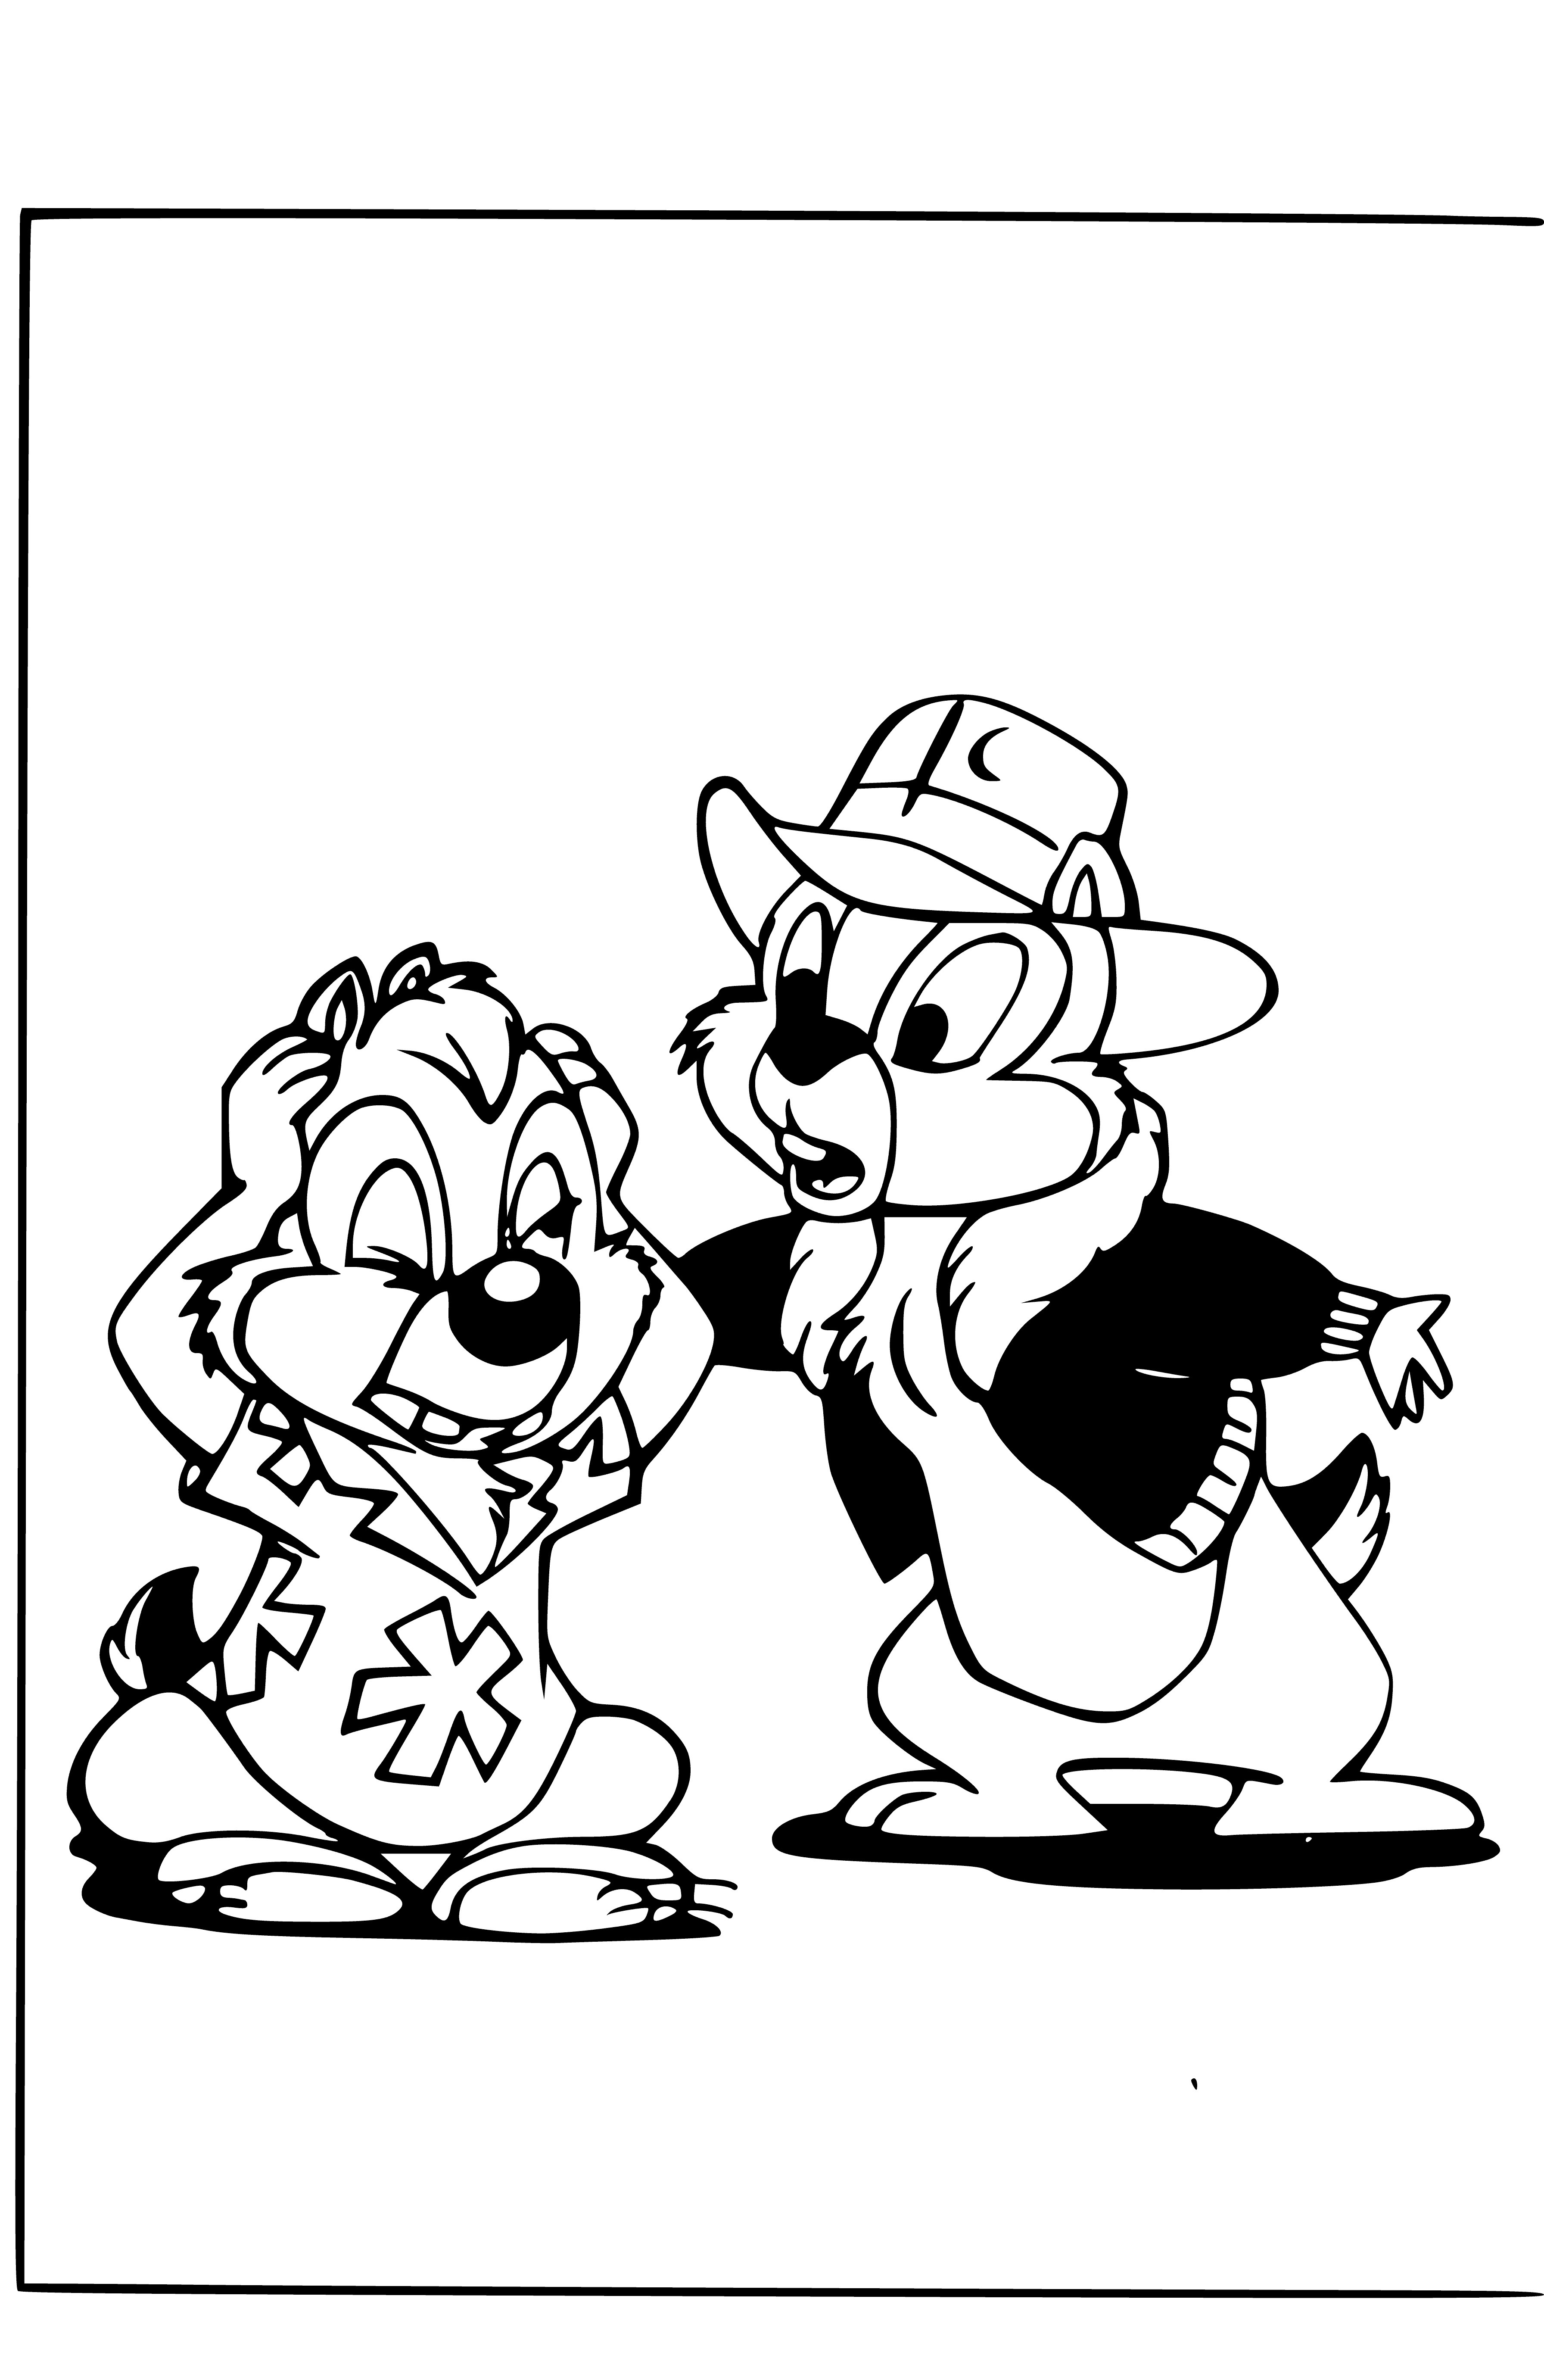 coloring page: Two chipmunks peek out with paws up & big eyes, wearing red hats with white dots.